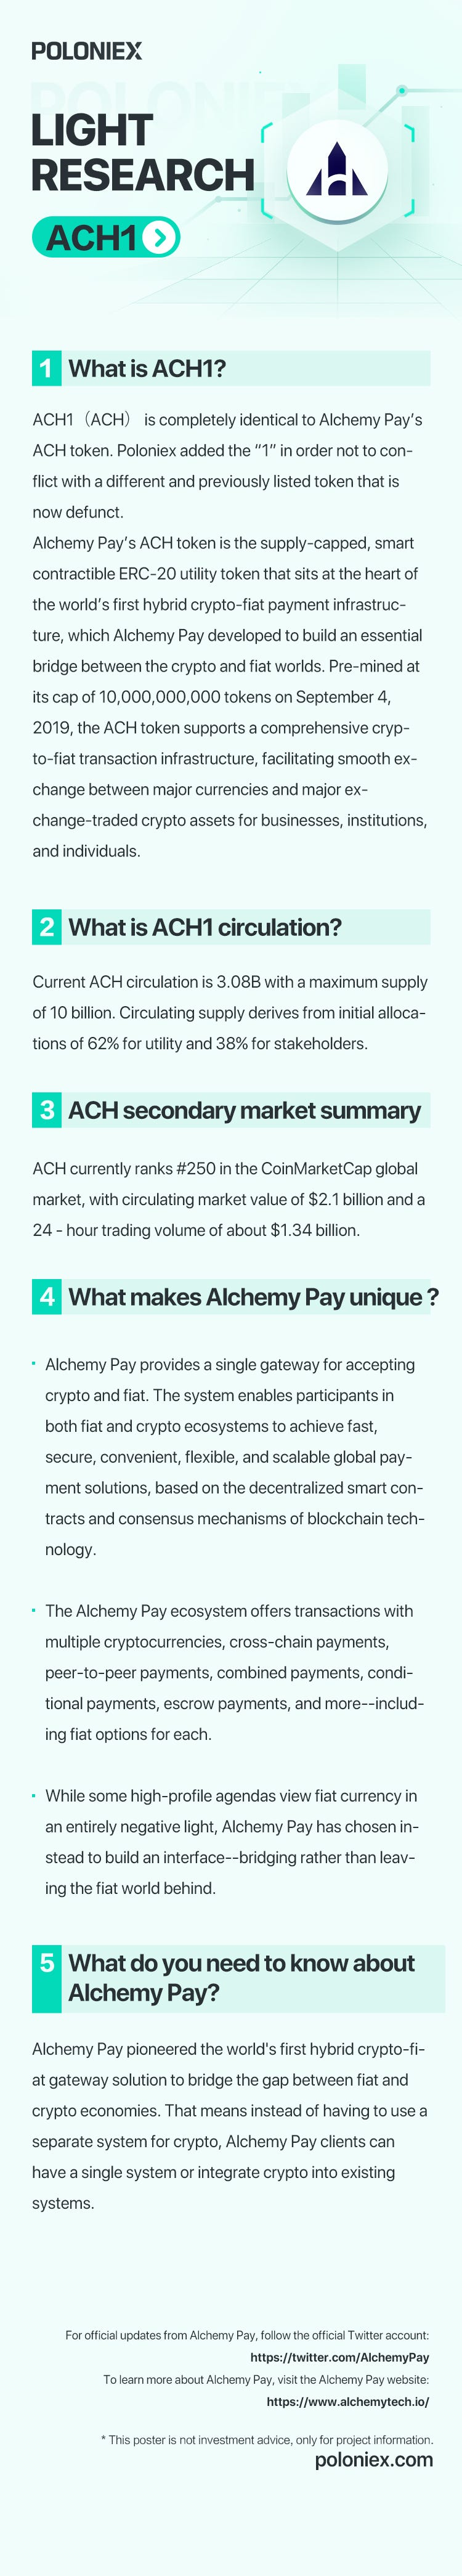 Poloniex Project Light Research — Alchemy PayCryptocurrency Trading Signals, Strategies & Templates | DexStrats